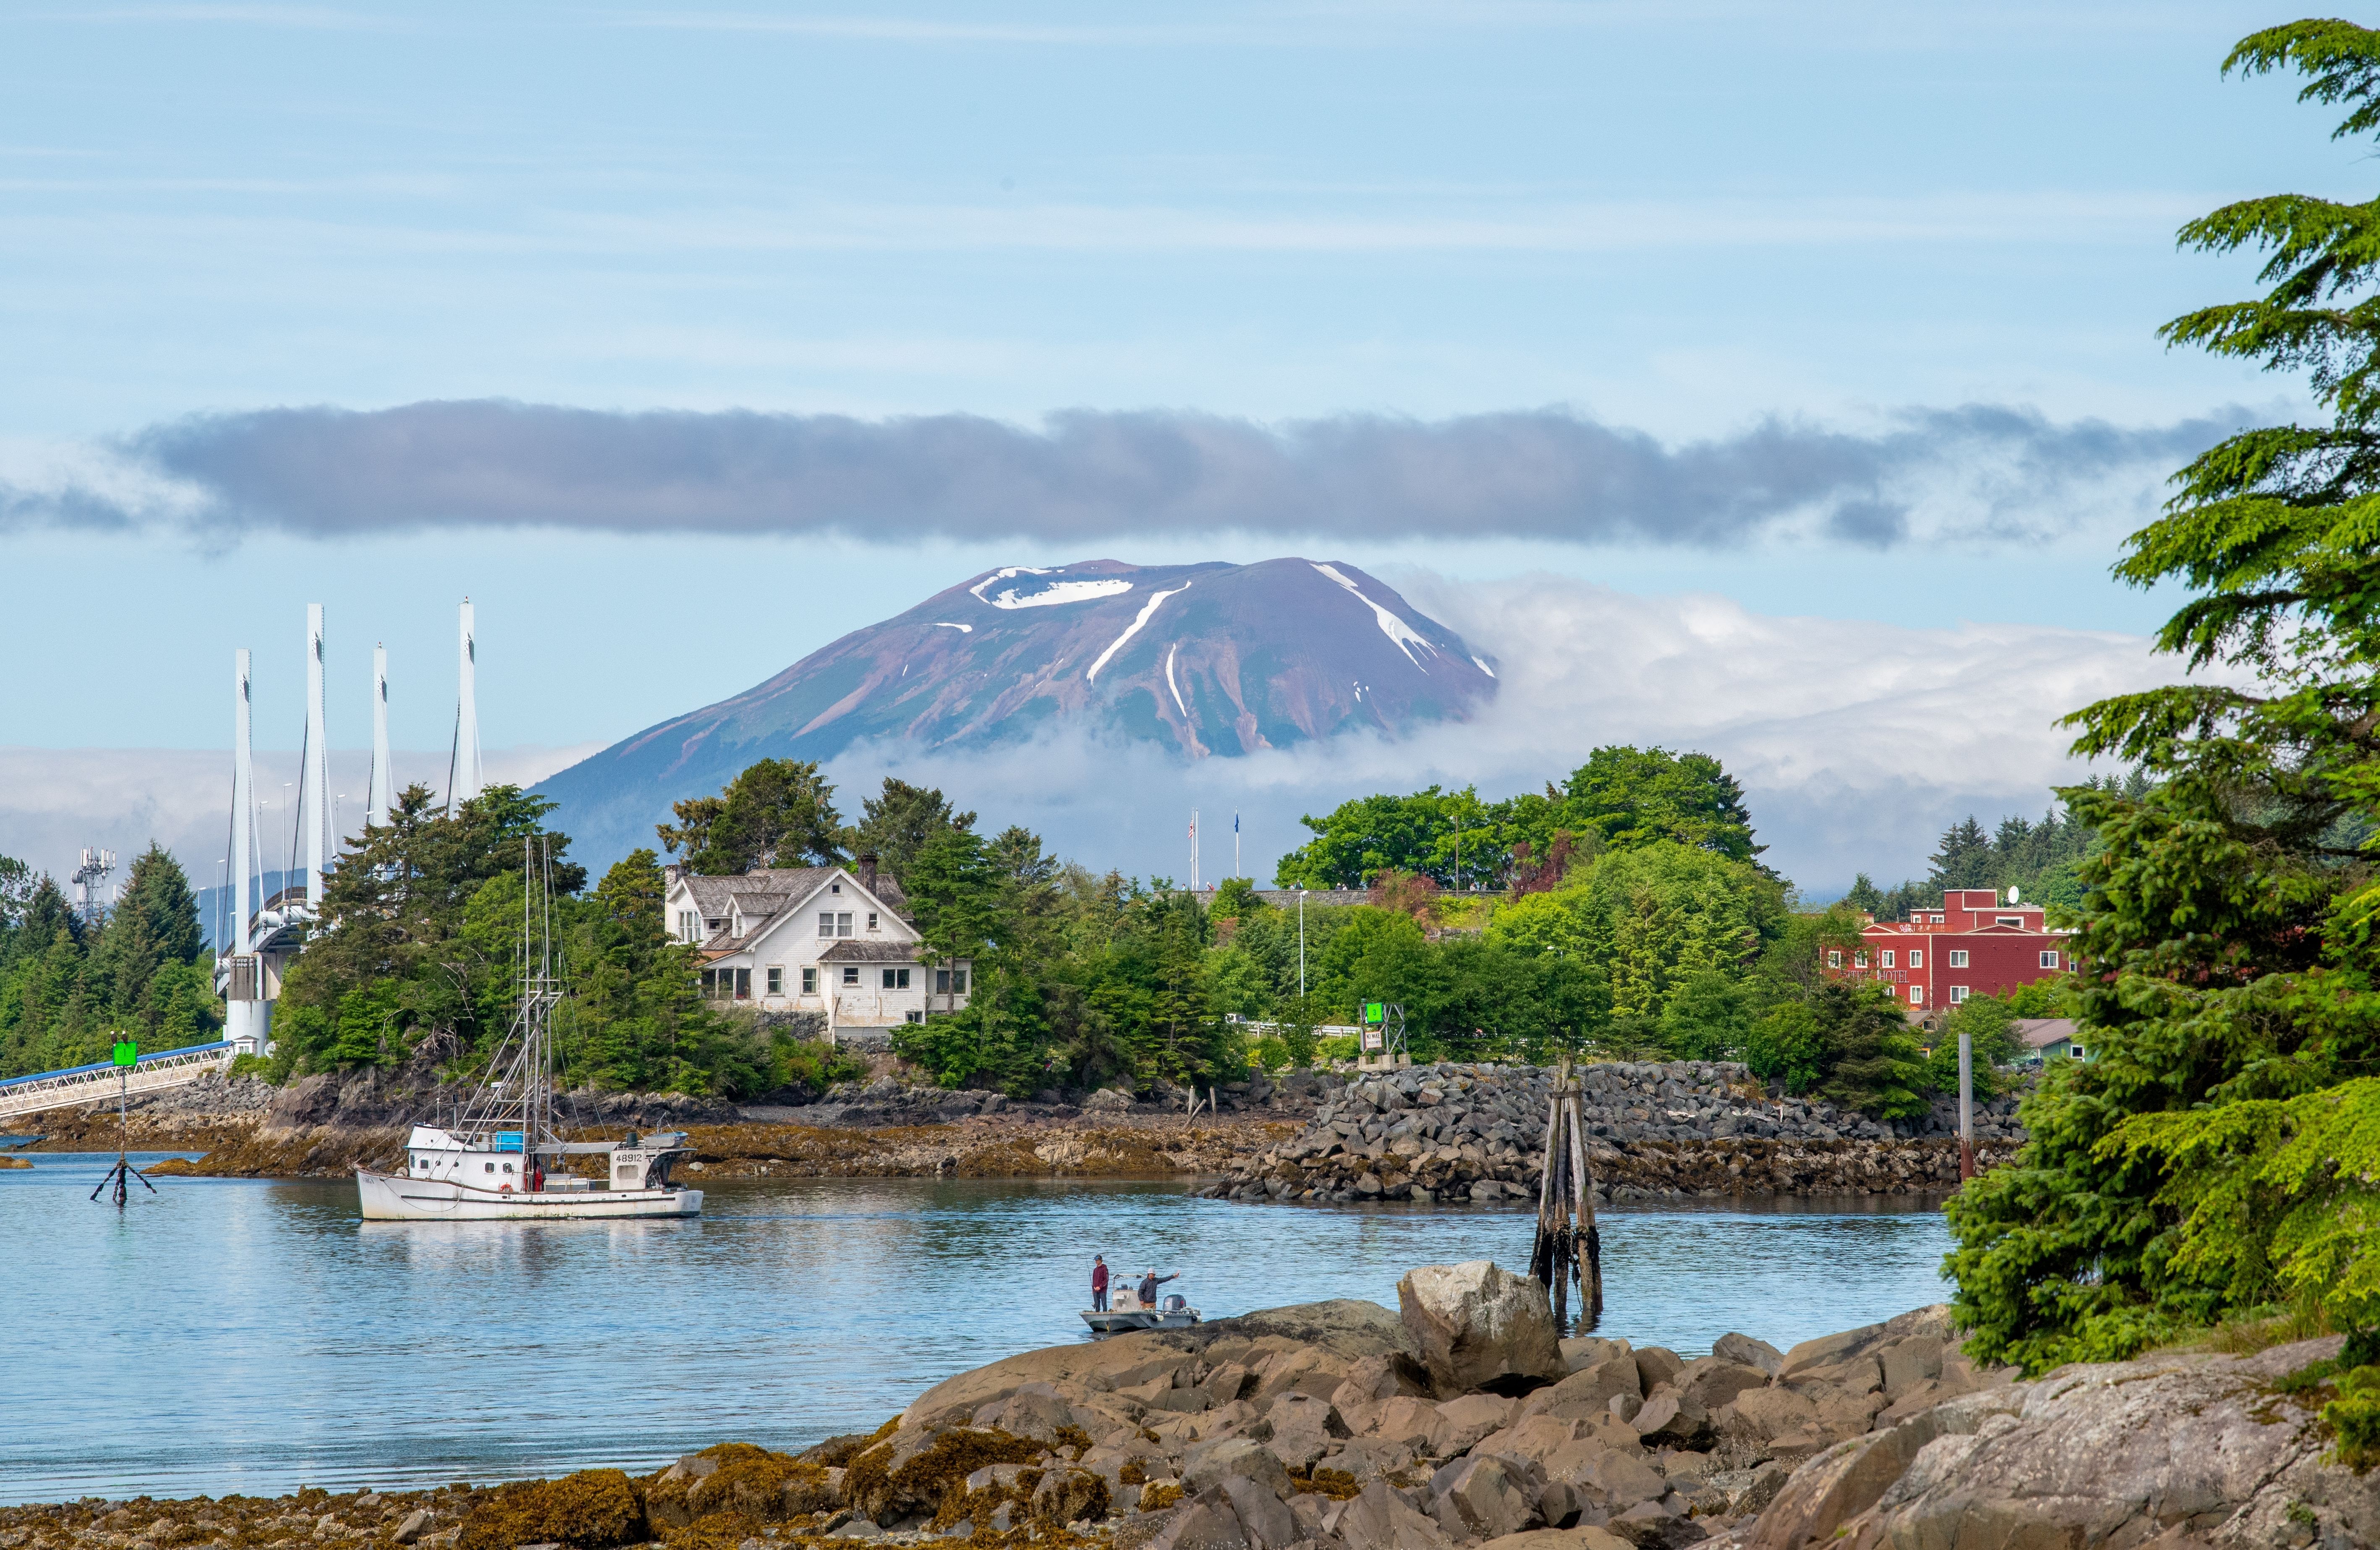 View of a volcano and harbor in Sitka, Alaska, from a cruise ship, highlighting a typical Alaskan cruise port.